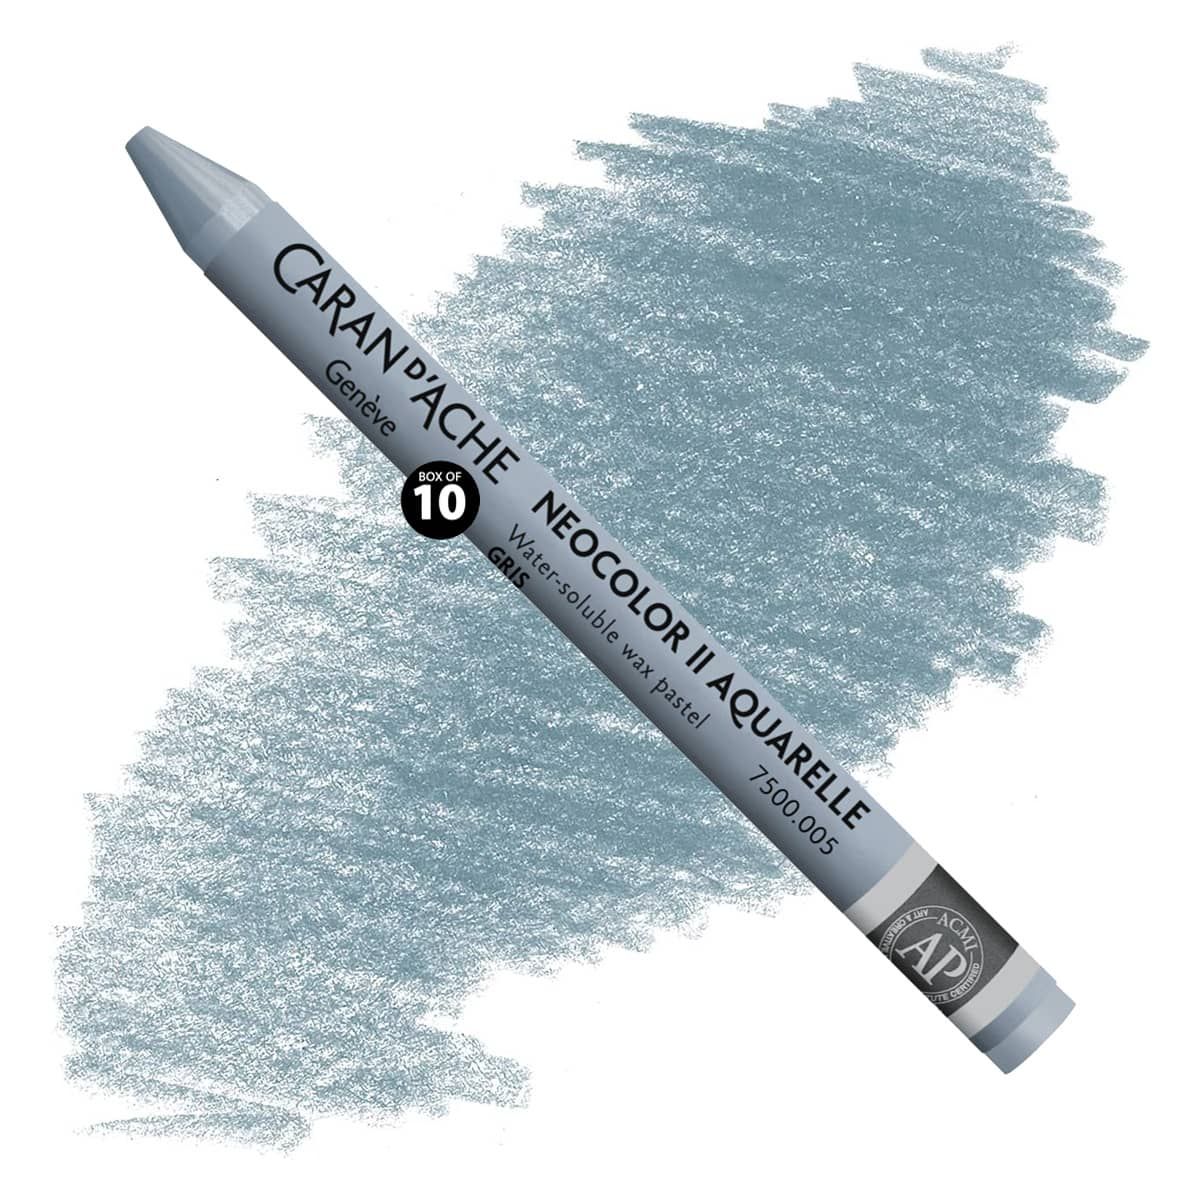 Caran d'Ache Neocolor II Water Soluble Wax Pastels – Paper and Grace